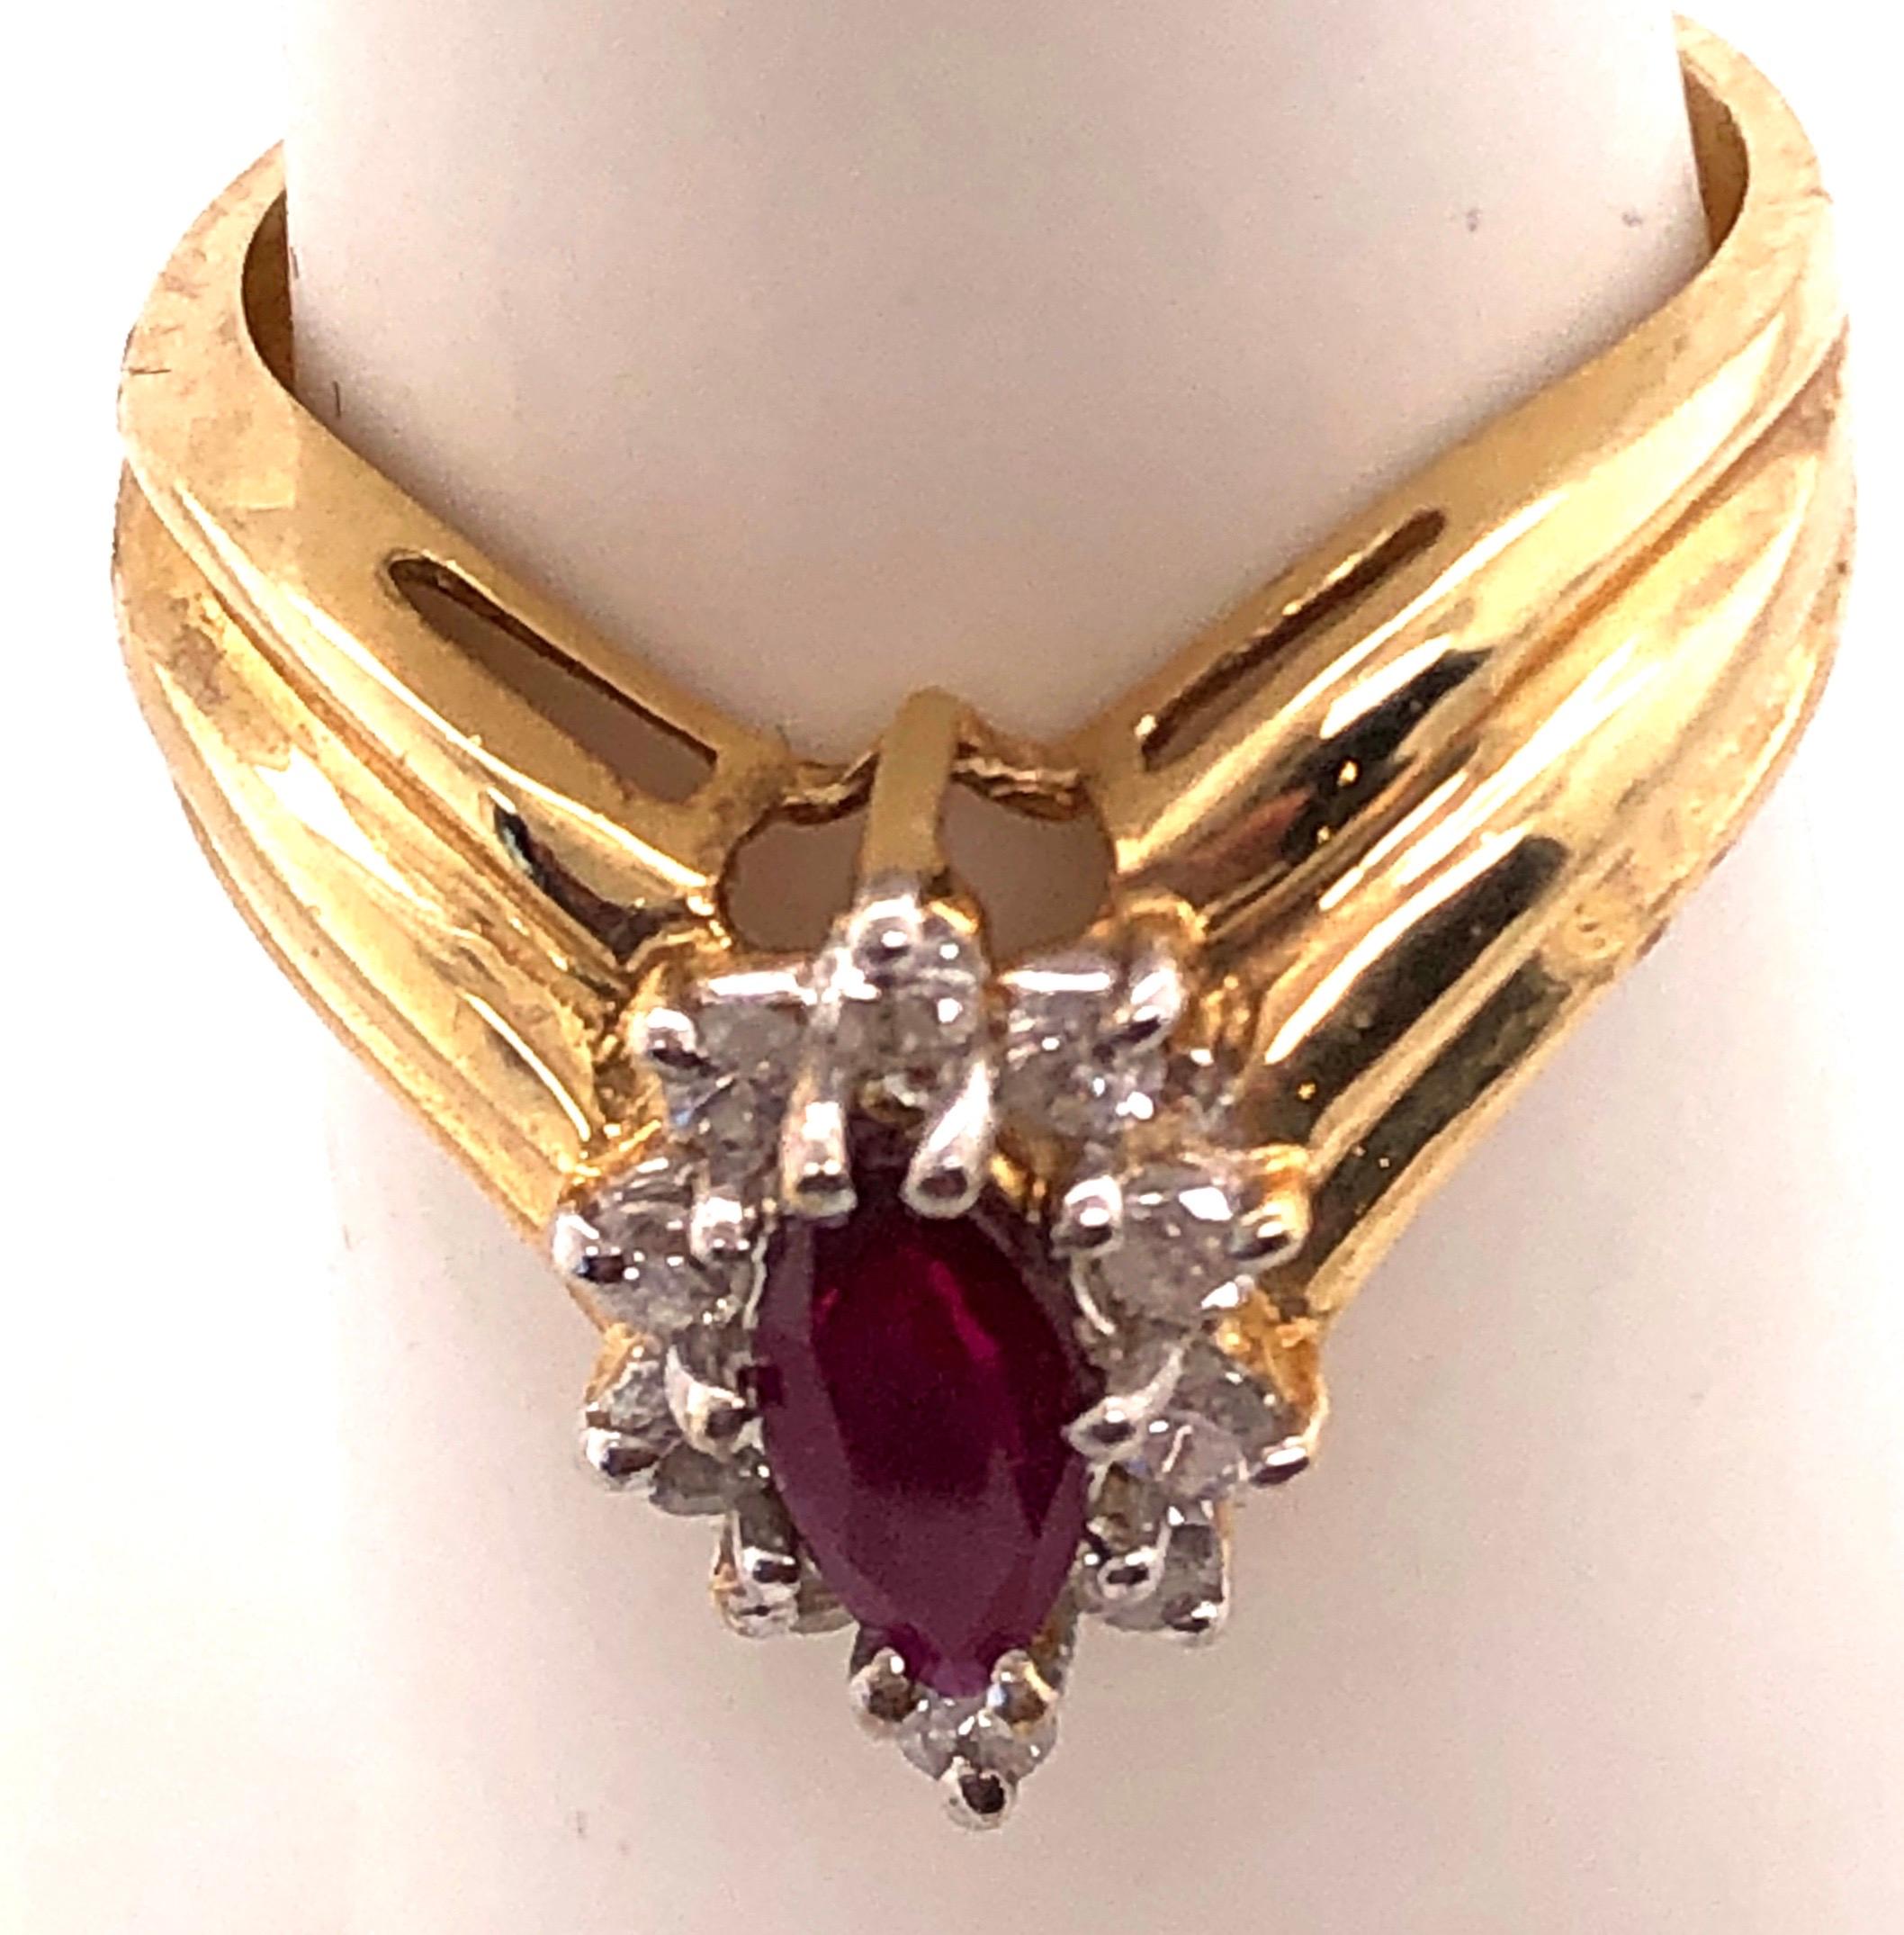 14 Karat Yellow And White Gold Ruby Ring With Diamond Accents 
0.50 TDW.
Size 7
4.43 grams total weight.